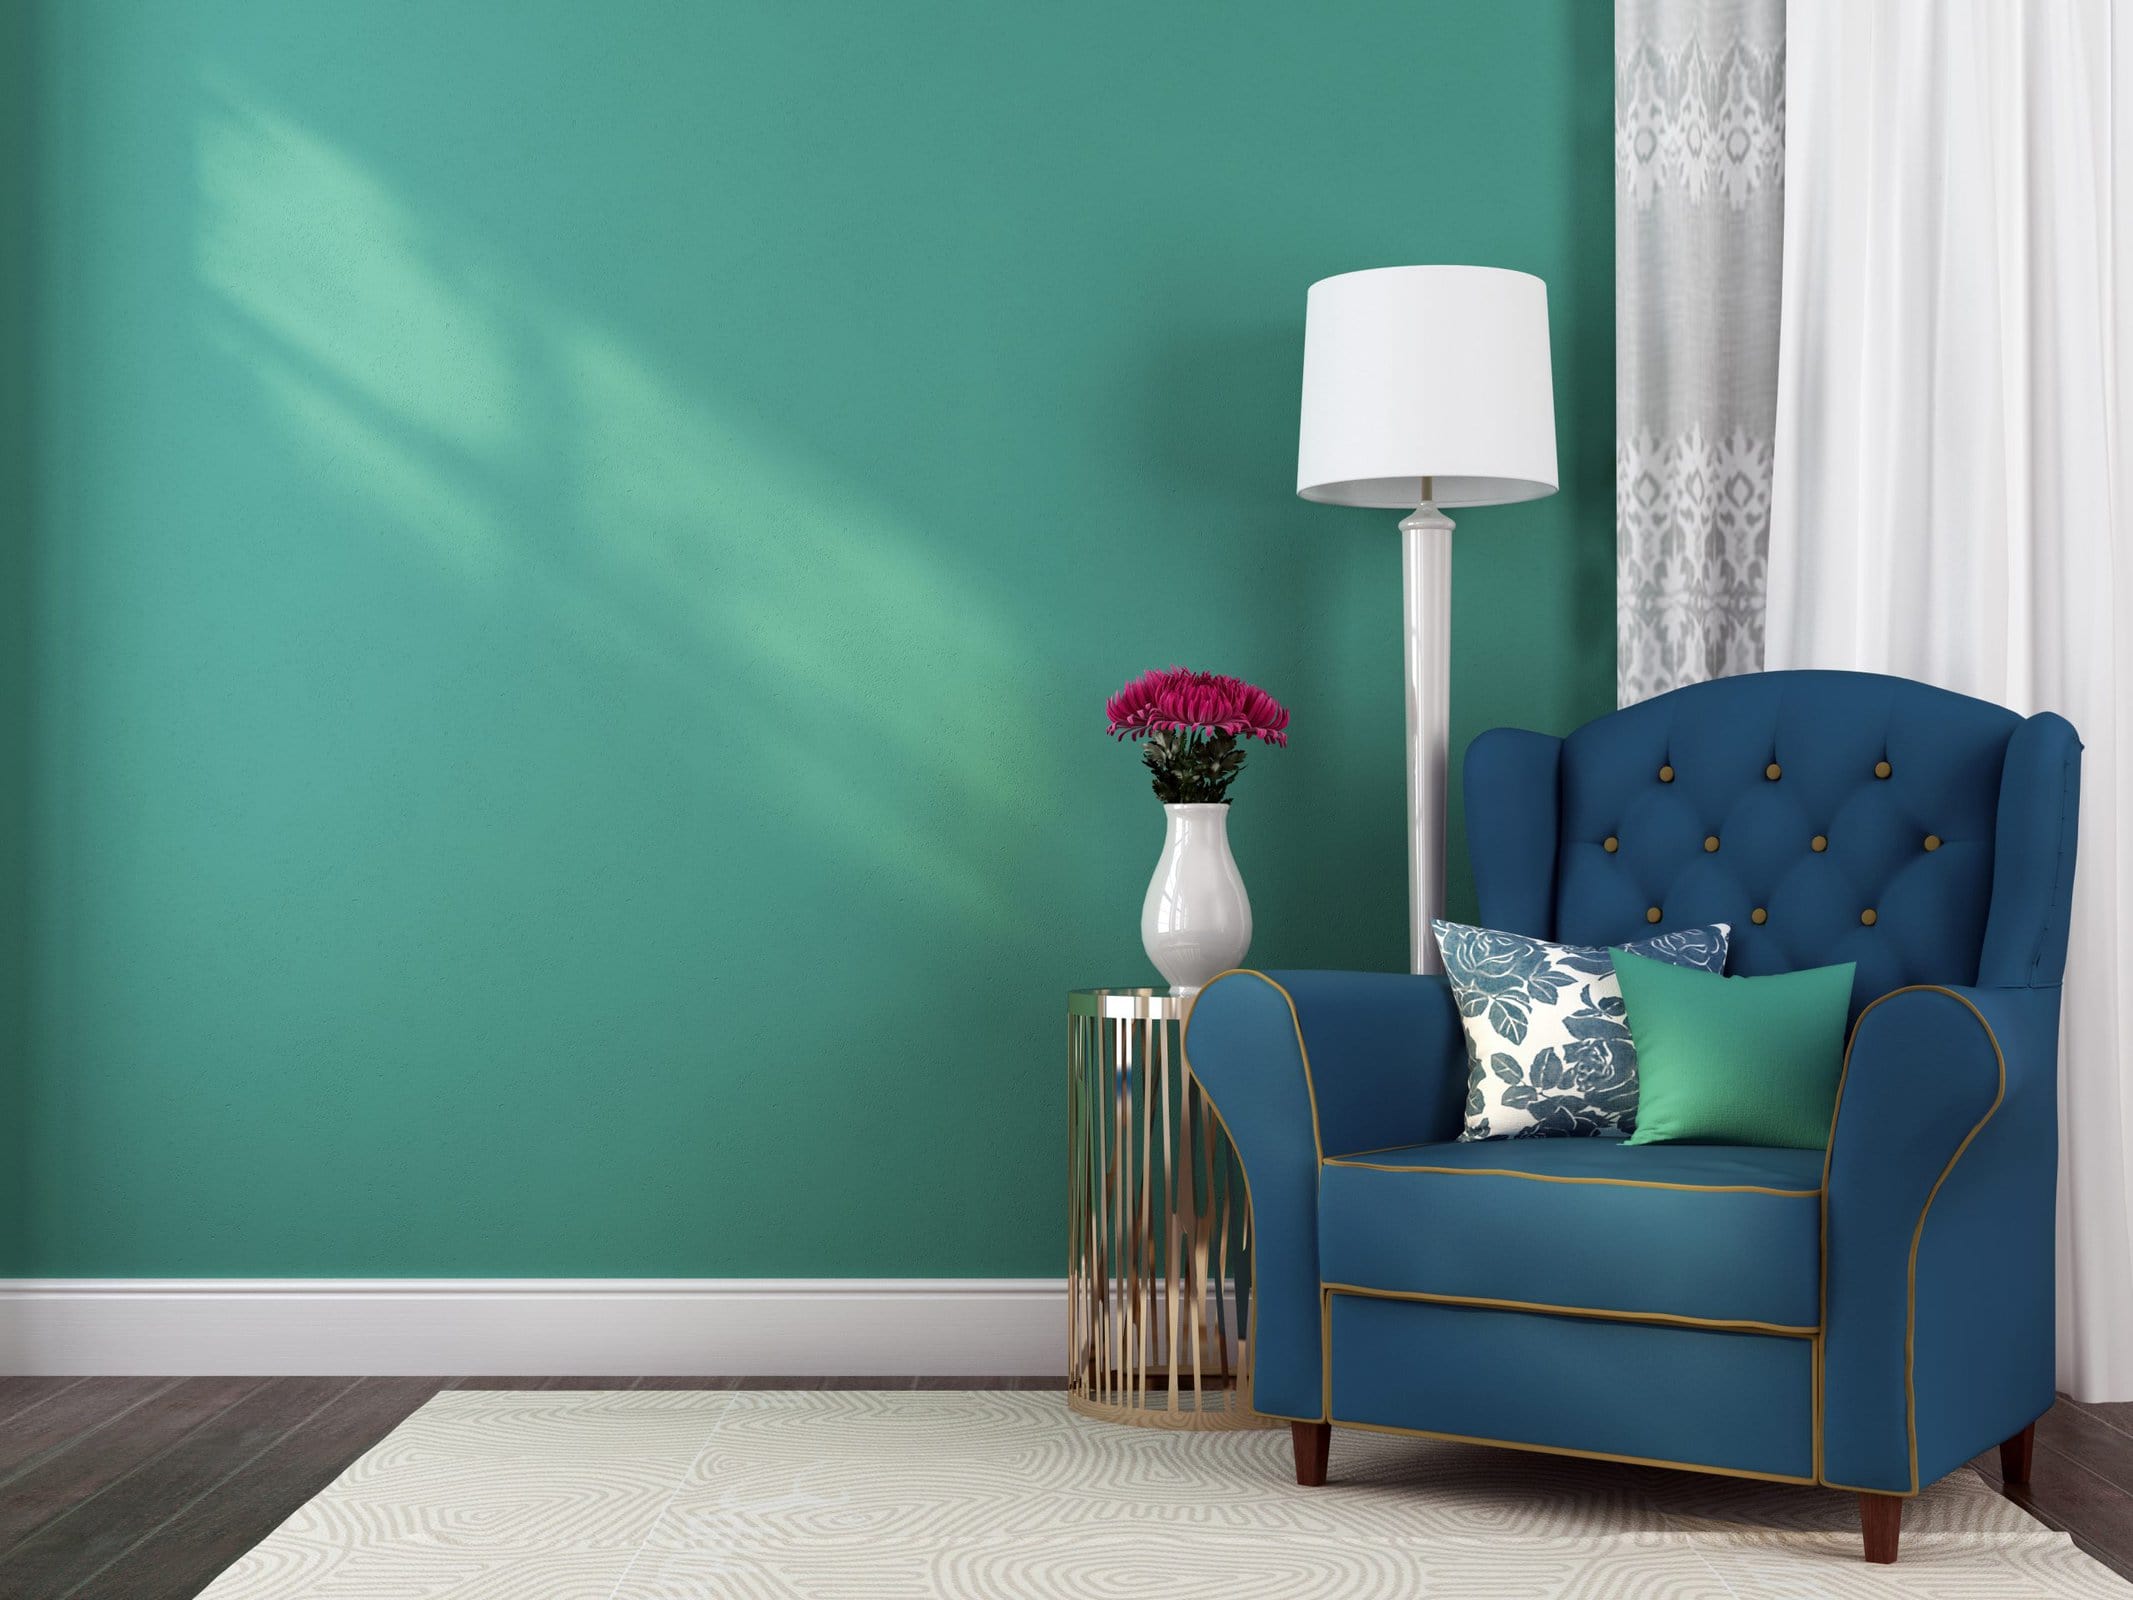  Deep Blue Shades Pair Beautifully With Turquoise scaled